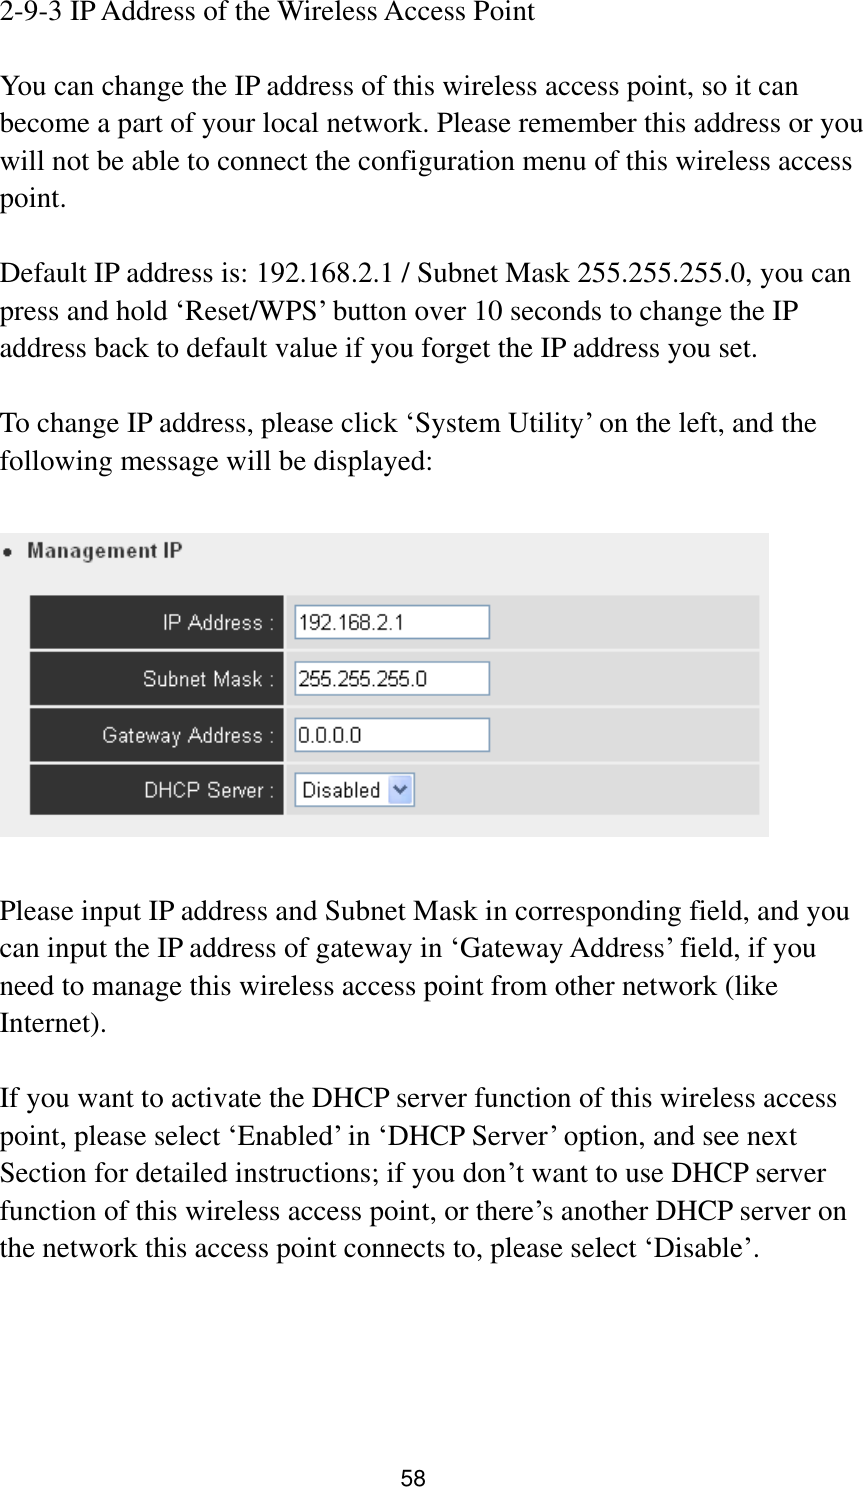 58 2-9-3 IP Address of the Wireless Access Point  You can change the IP address of this wireless access point, so it can become a part of your local network. Please remember this address or you will not be able to connect the configuration menu of this wireless access point.  Default IP address is: 192.168.2.1 / Subnet Mask 255.255.255.0, you can press and hold „Reset/WPS‟ button over 10 seconds to change the IP address back to default value if you forget the IP address you set.  To change IP address, please click „System Utility‟ on the left, and the following message will be displayed:    Please input IP address and Subnet Mask in corresponding field, and you can input the IP address of gateway in „Gateway Address‟ field, if you need to manage this wireless access point from other network (like Internet).  If you want to activate the DHCP server function of this wireless access point, please select „Enabled‟ in „DHCP Server‟ option, and see next Section for detailed instructions; if you don‟t want to use DHCP server function of this wireless access point, or there‟s another DHCP server on the network this access point connects to, please select „Disable‟.    